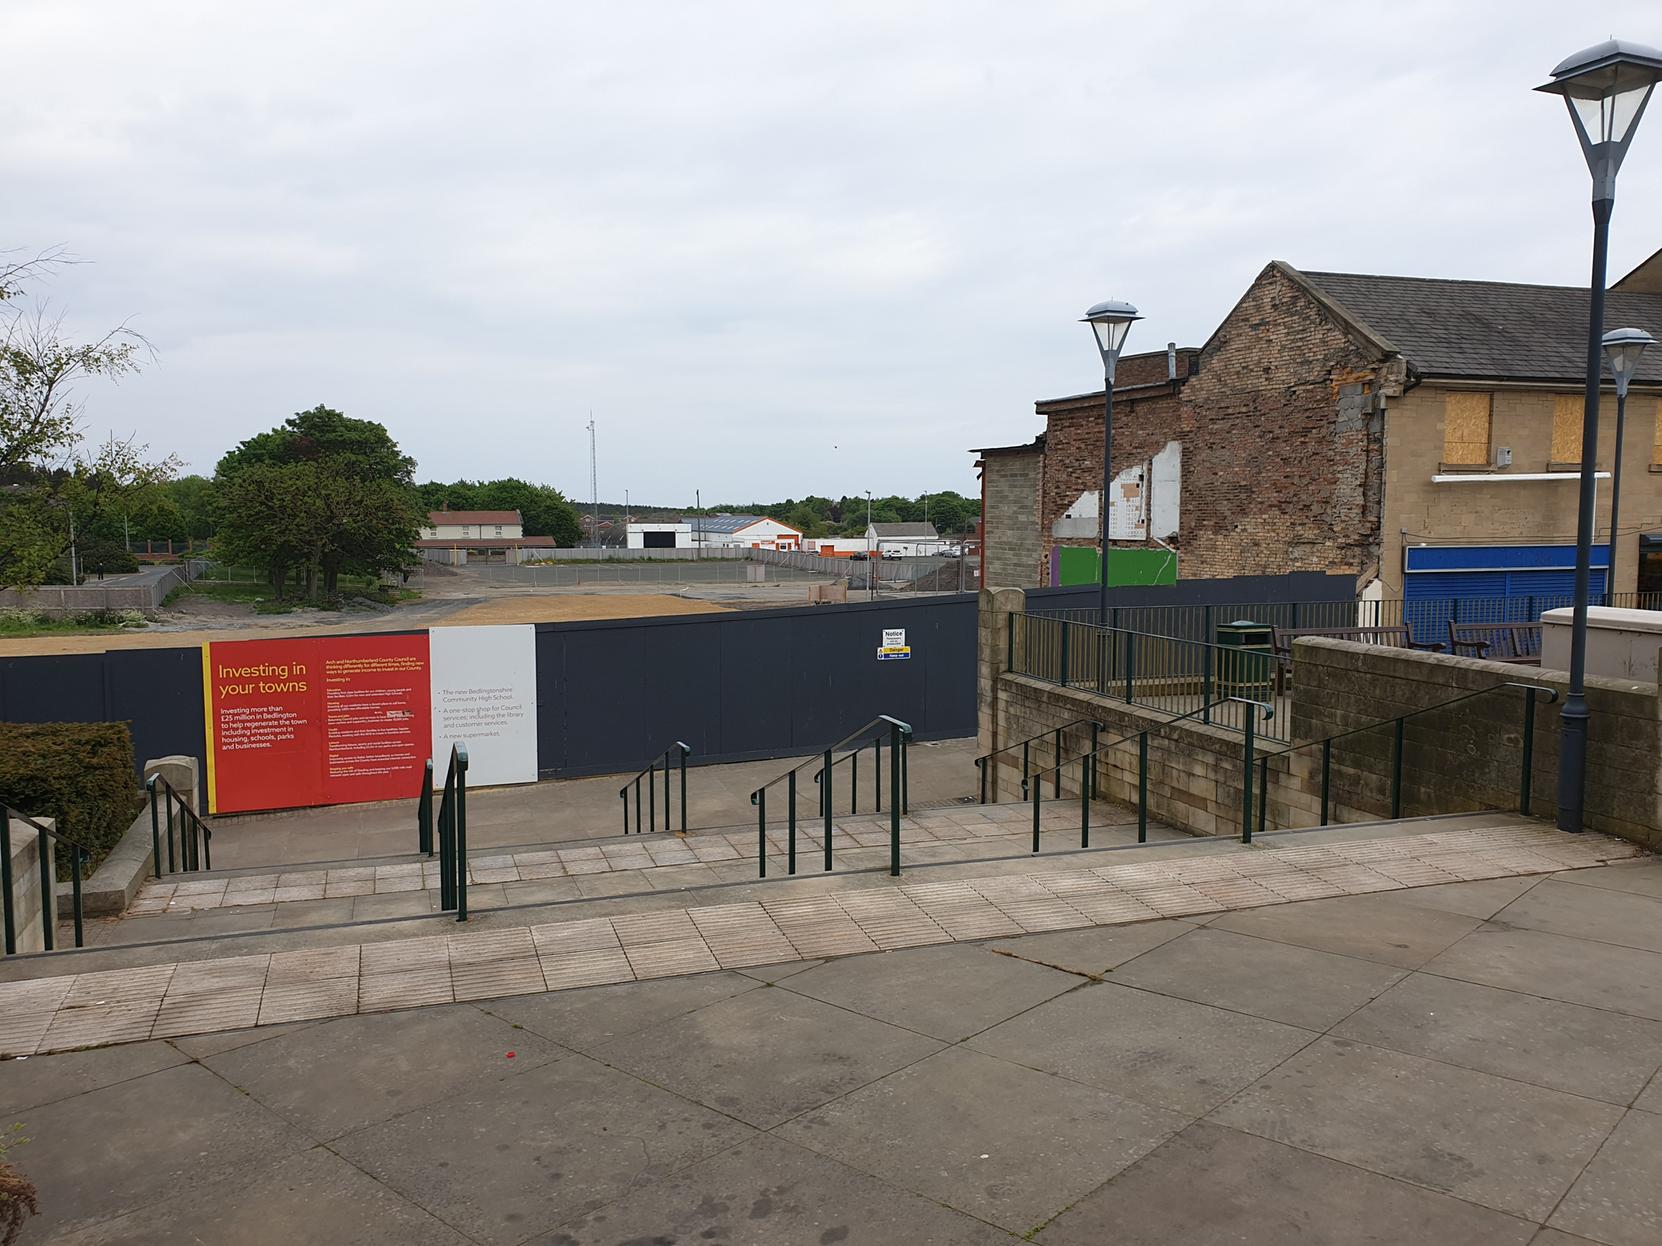 More information about "Bedlington town-centre project to get back on track with £1.4m council funding"